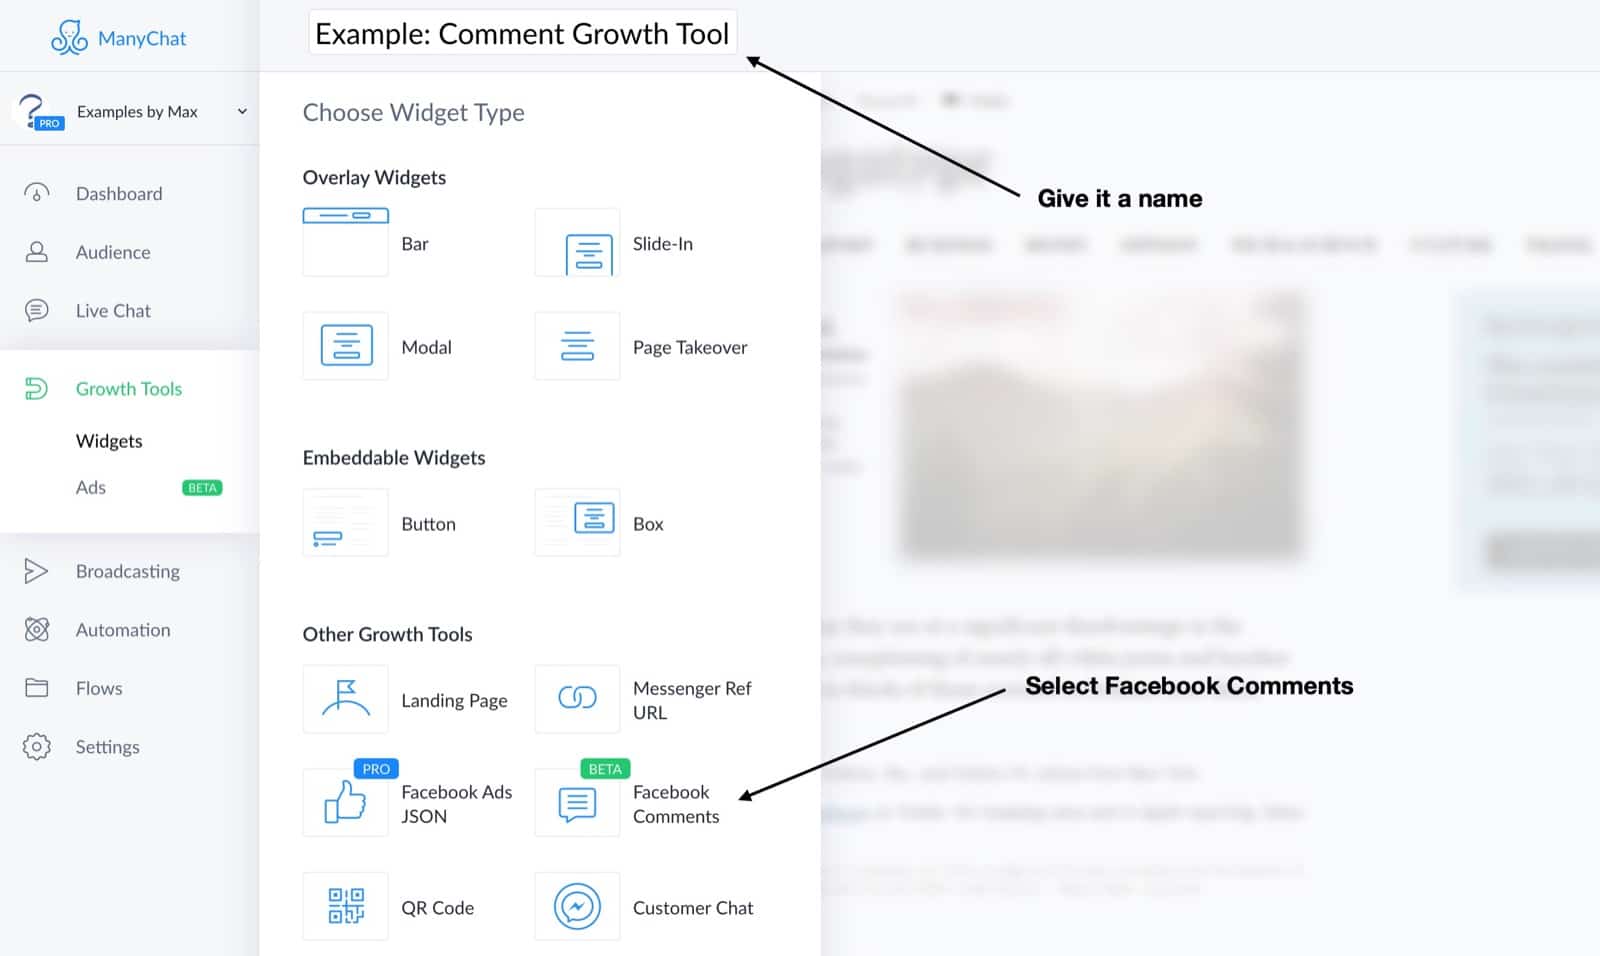 create the manychat comment growth tool